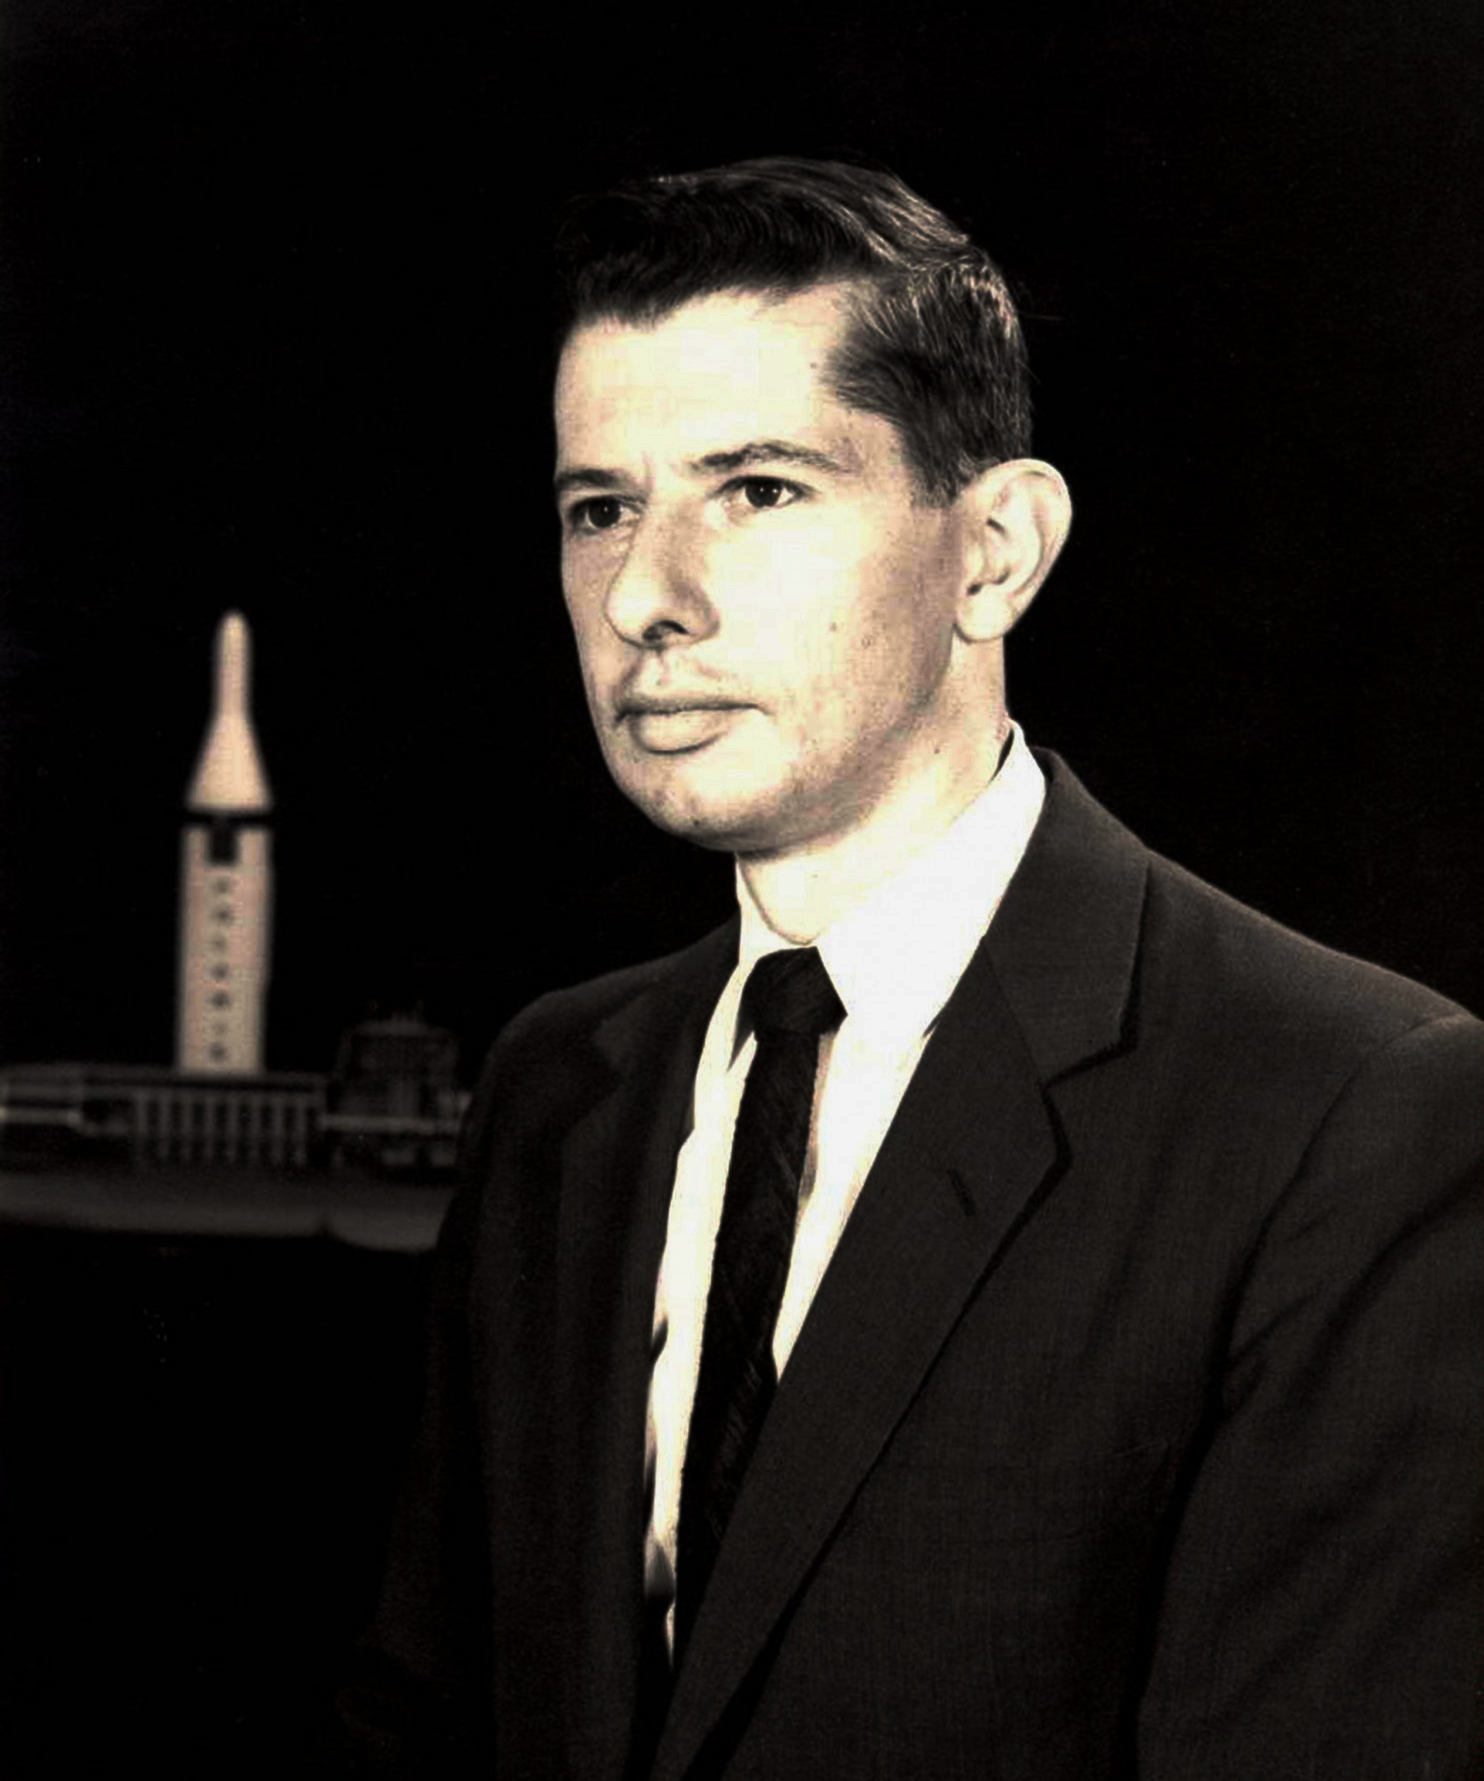 A young man looks away from the camera with a neutral expression on his face. Small models of a Polaris missile and a submarine sit in the background.